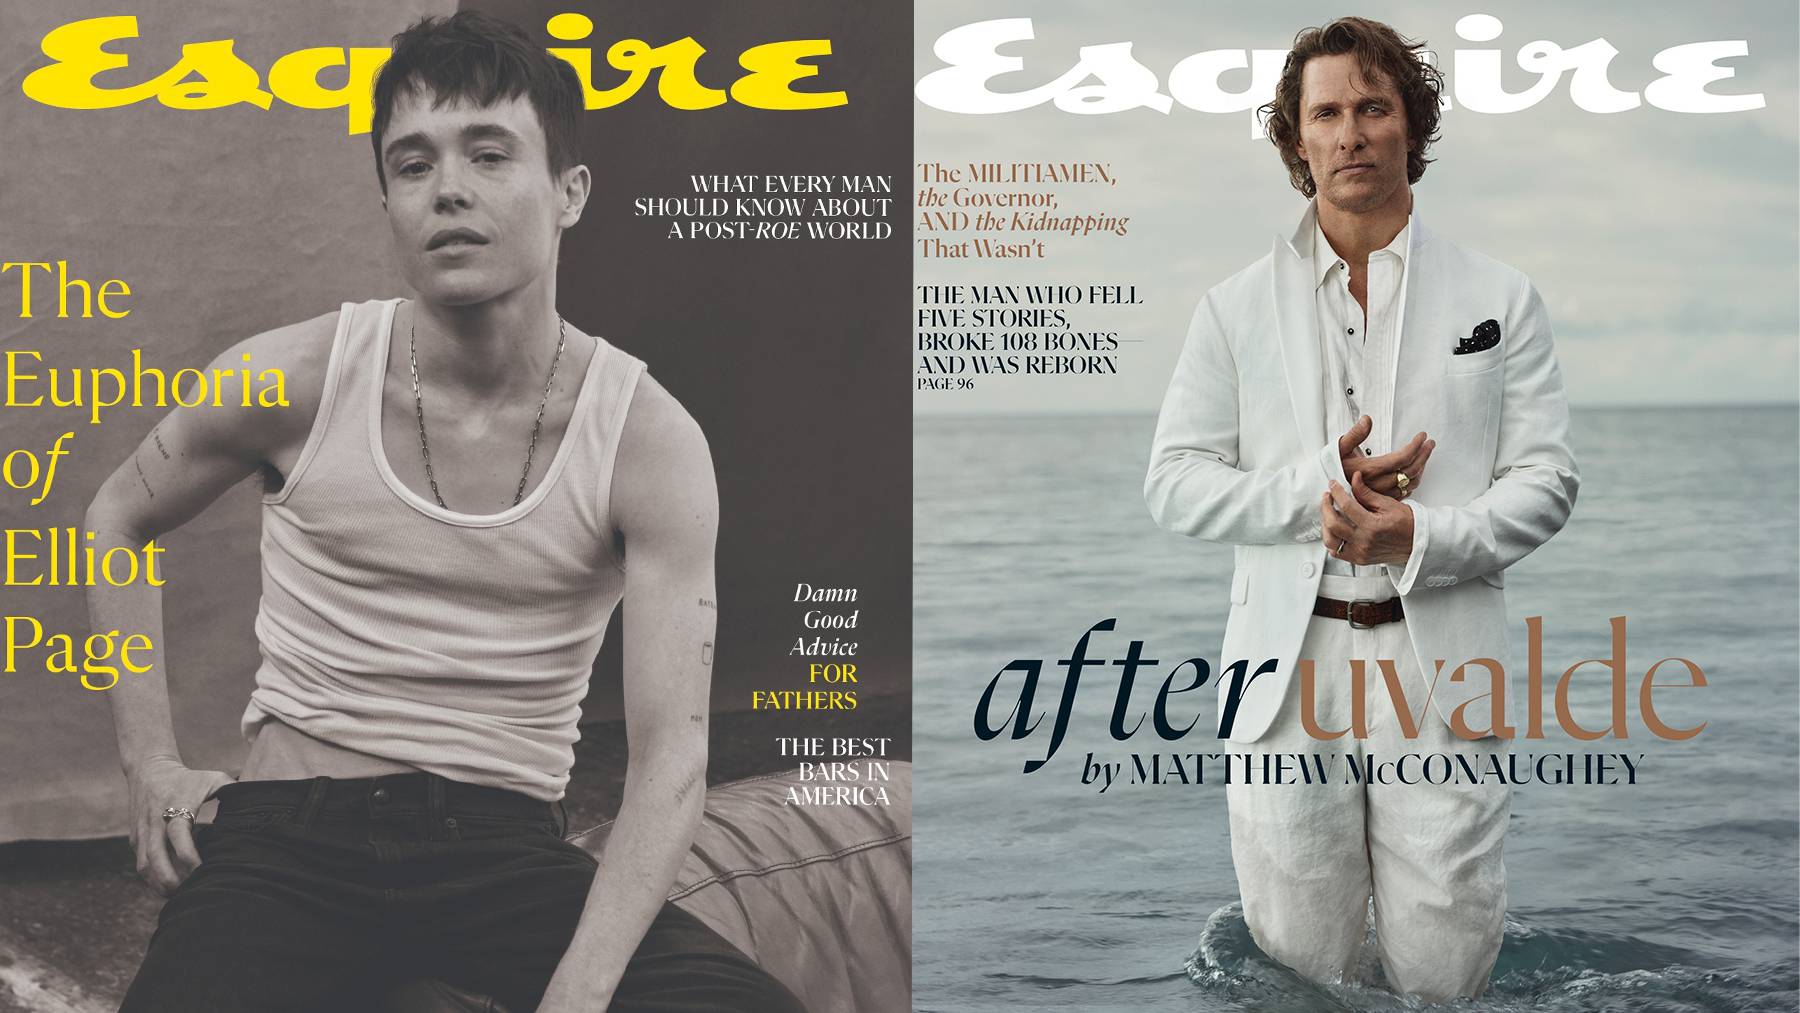 Elliot Page and Matthew McConaughey on the Summer and October 2022 covers of Esquire, respectively